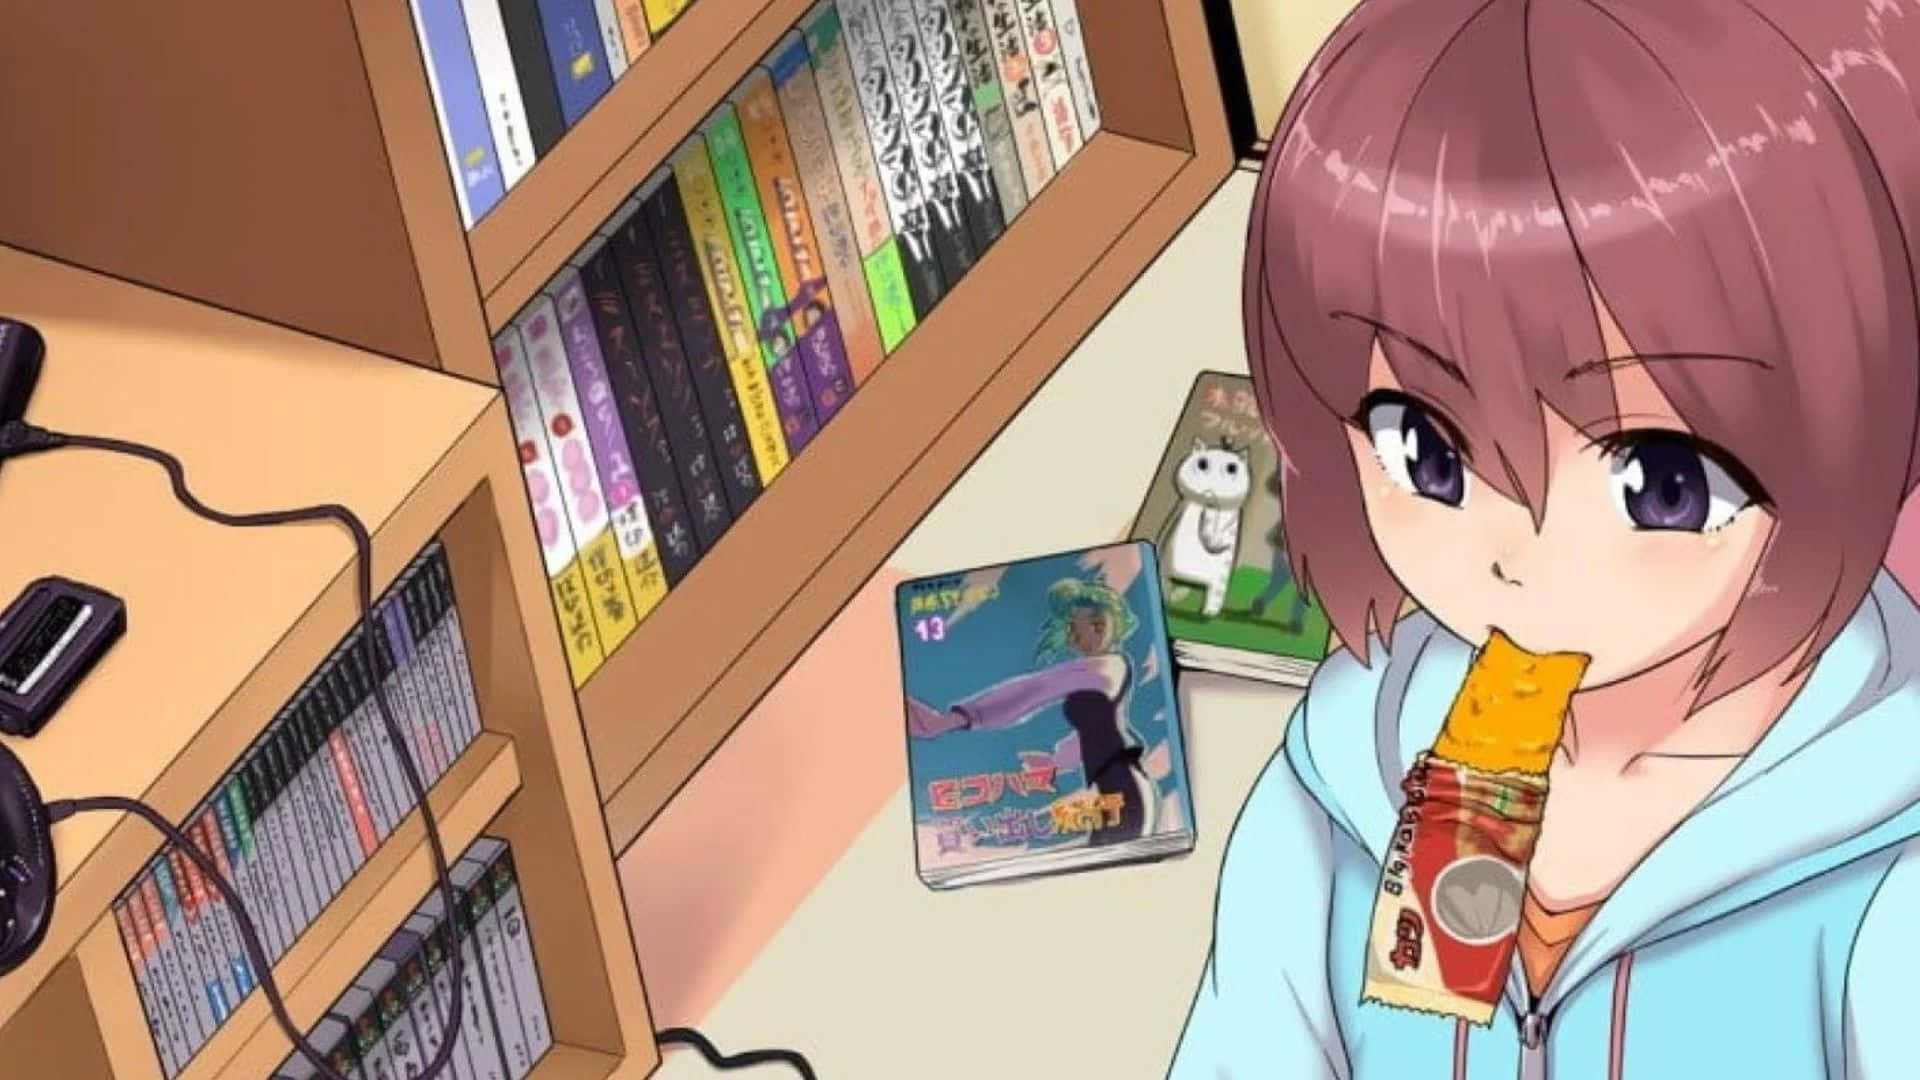 A Girl With Pink Hair Is Eating A Snack In Front Of A Book Shelf